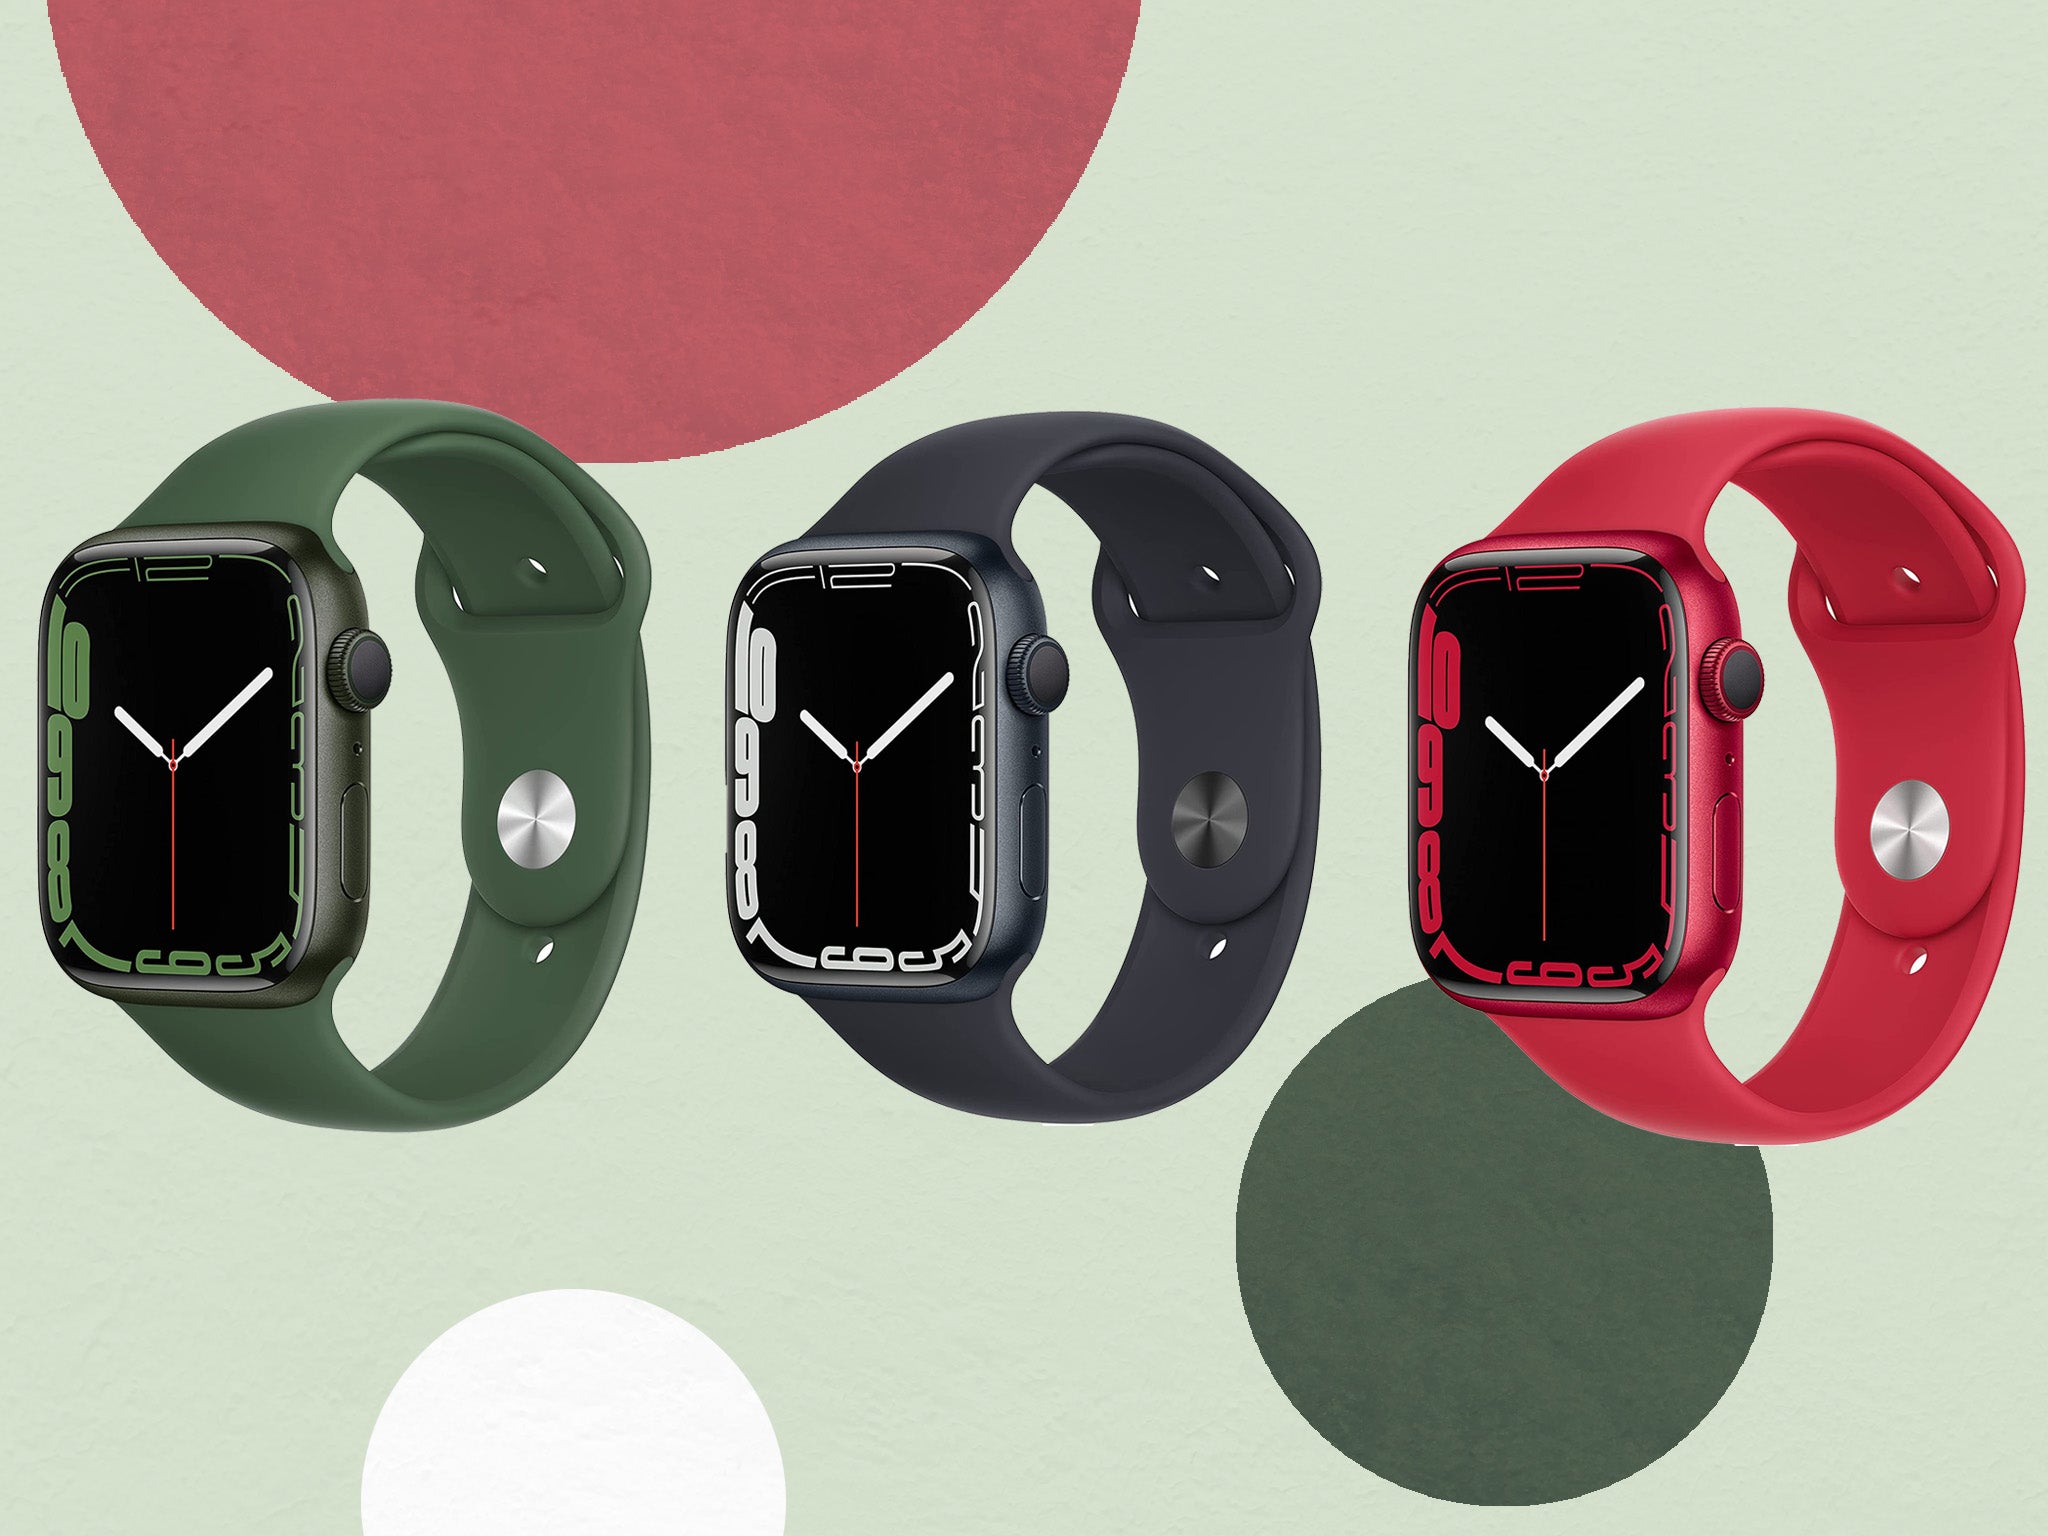 The Apple watch 7 discounts vary across sizes and colours, and include the affordable Apple watch SE